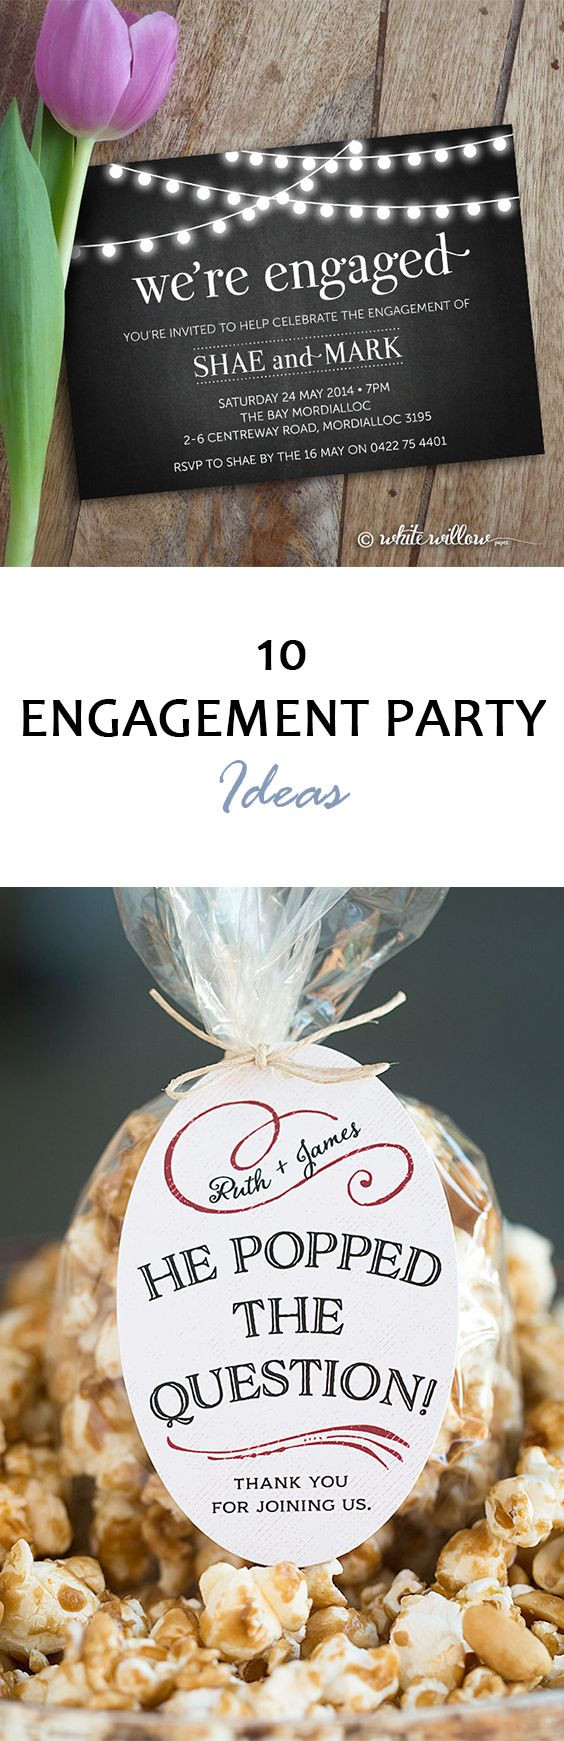 Affordable Engagement Party Ideas
 10 Engagement Party Ideas Oh My Veil